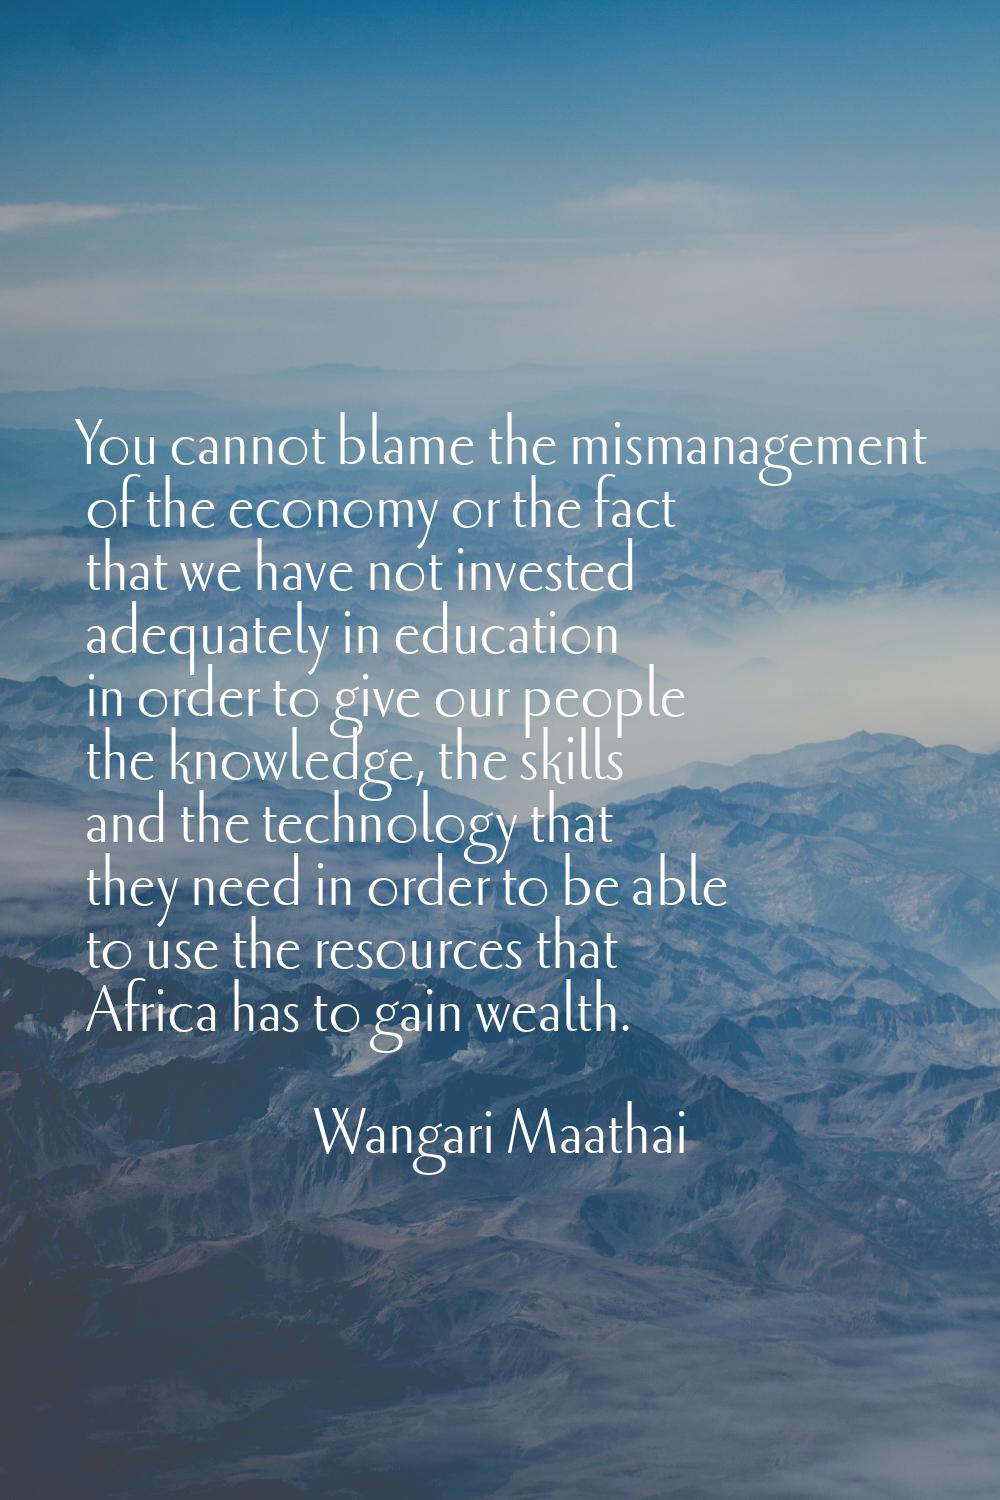 You cannot blame the mismanagement of the economy or the fact that we have not invested adequately 